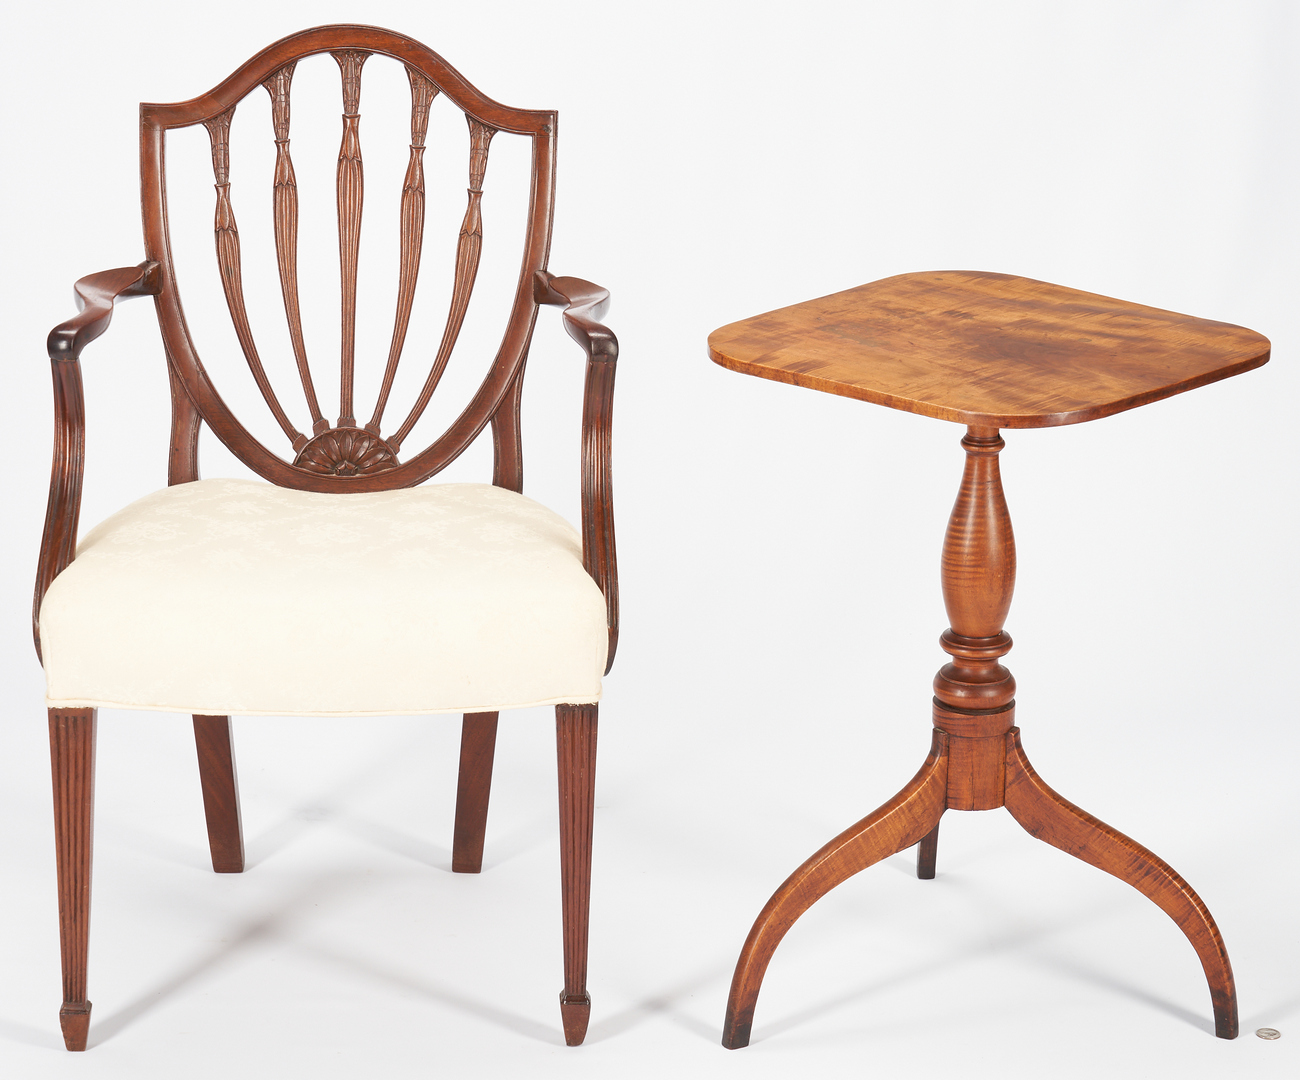 Lot 436: Shield Back Hepplewhite Style Armchair & Tiger Maple Candle Stand, 2 items